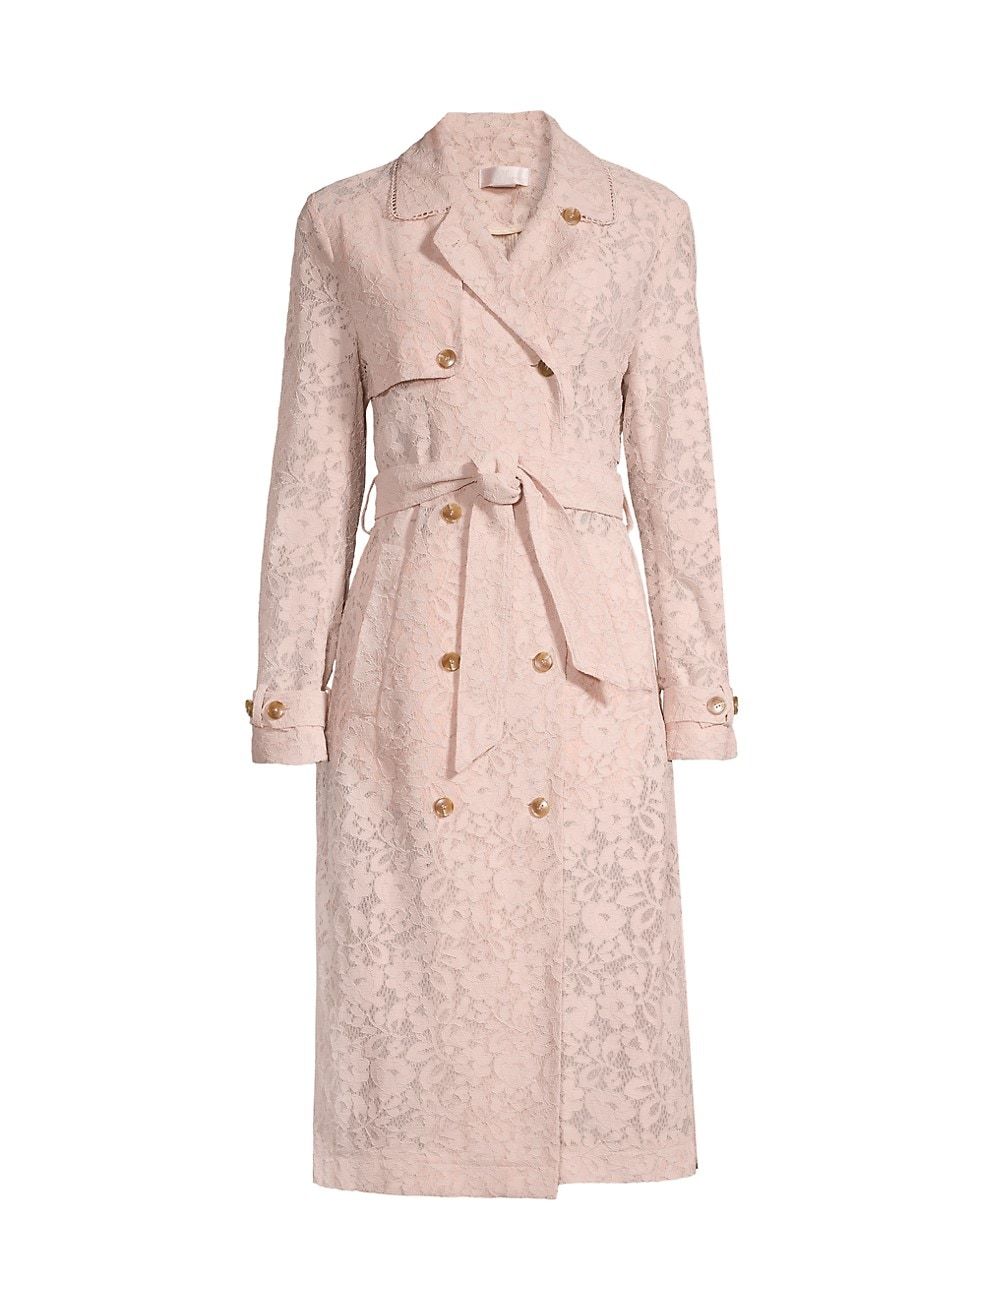 Corded Lace Trench Coat | Saks Fifth Avenue